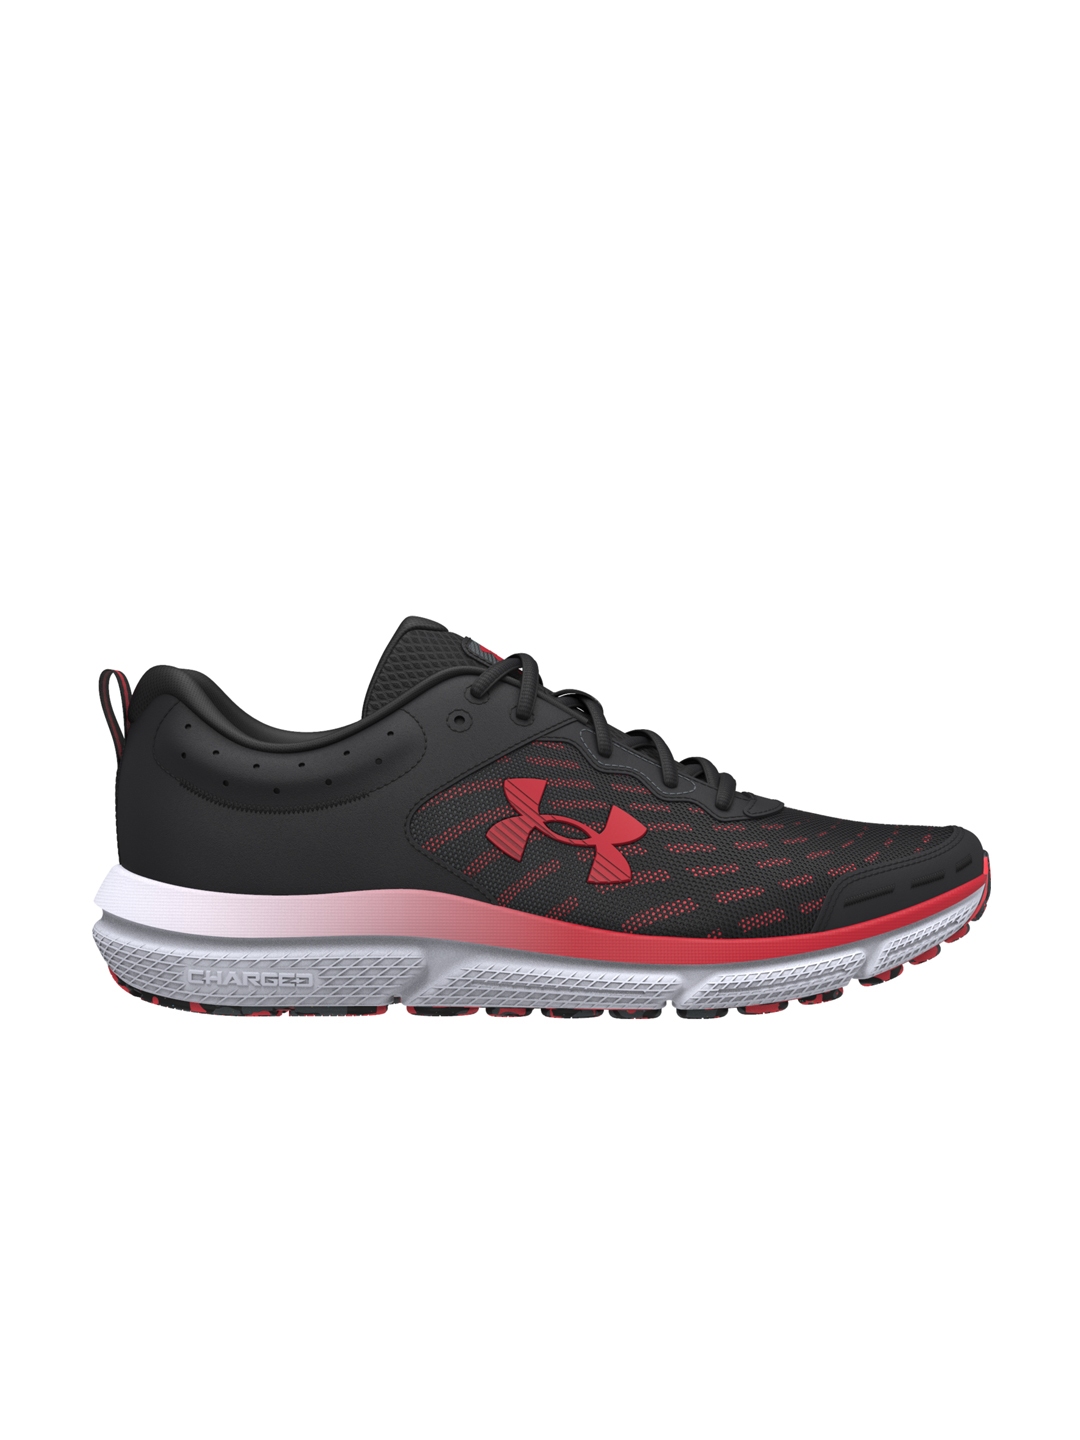 Buy UNDER ARMOUR Men Charged Assert 10 Running Shoes - Sports